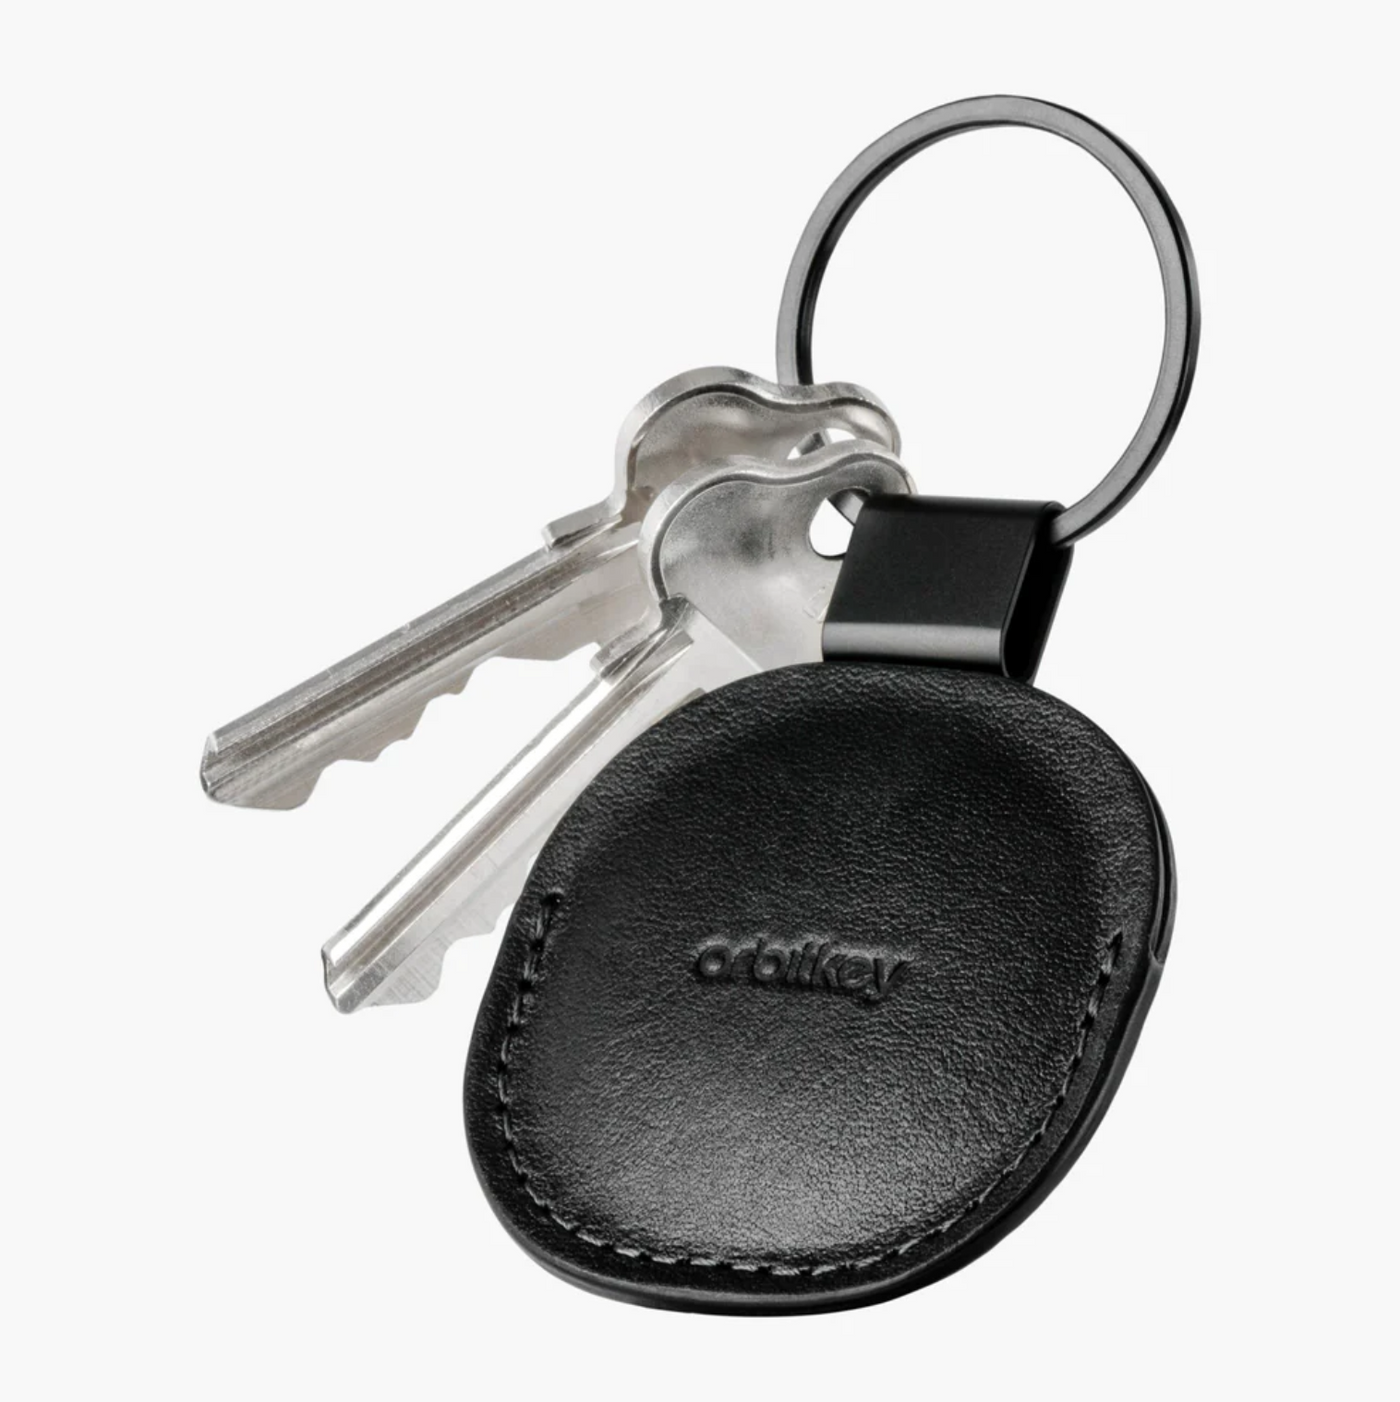 Orbitkey - Leather Holder for AirTag - Black